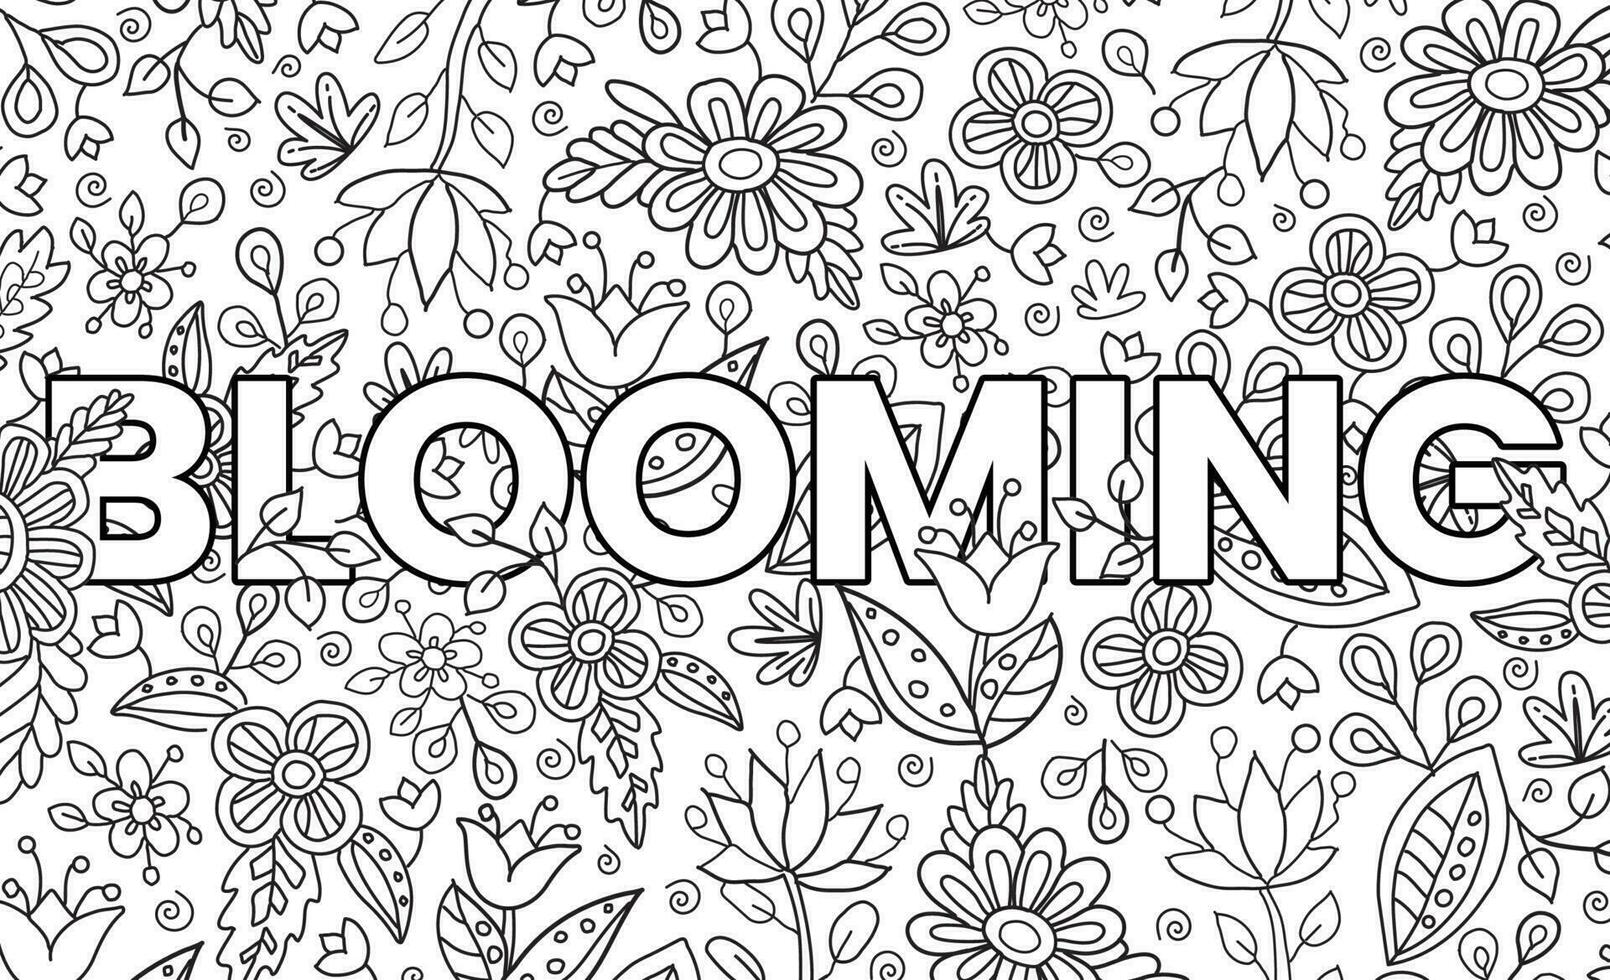 Blooming. Cute hand drawn coloring pages for kids and adults. Motivational quotes, text. Beautiful drawings for girls with patterns, details. Coloring book with flowers and tropical plants. Vector